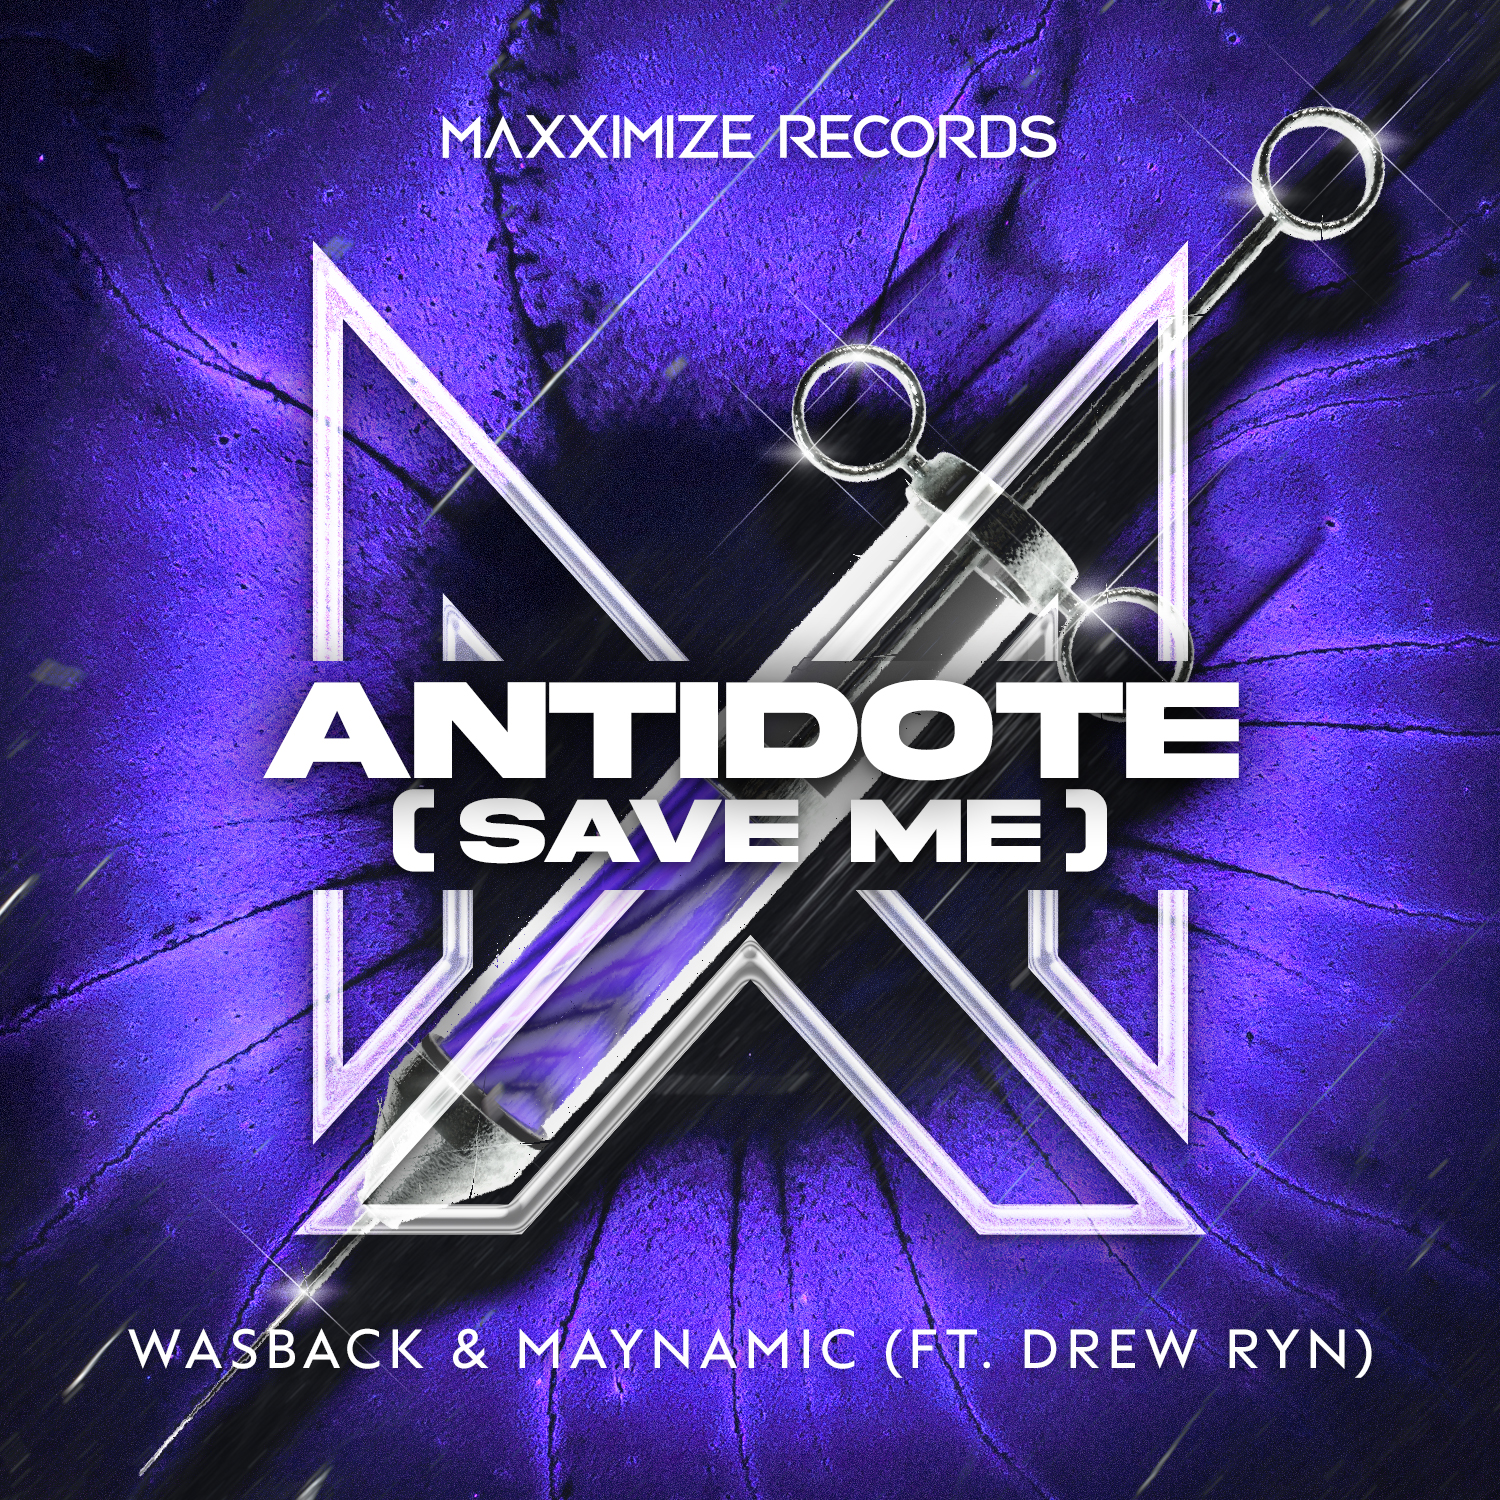 Wasback & Maynamic featuring Drew Ryn — Antidote (Save Me) cover artwork